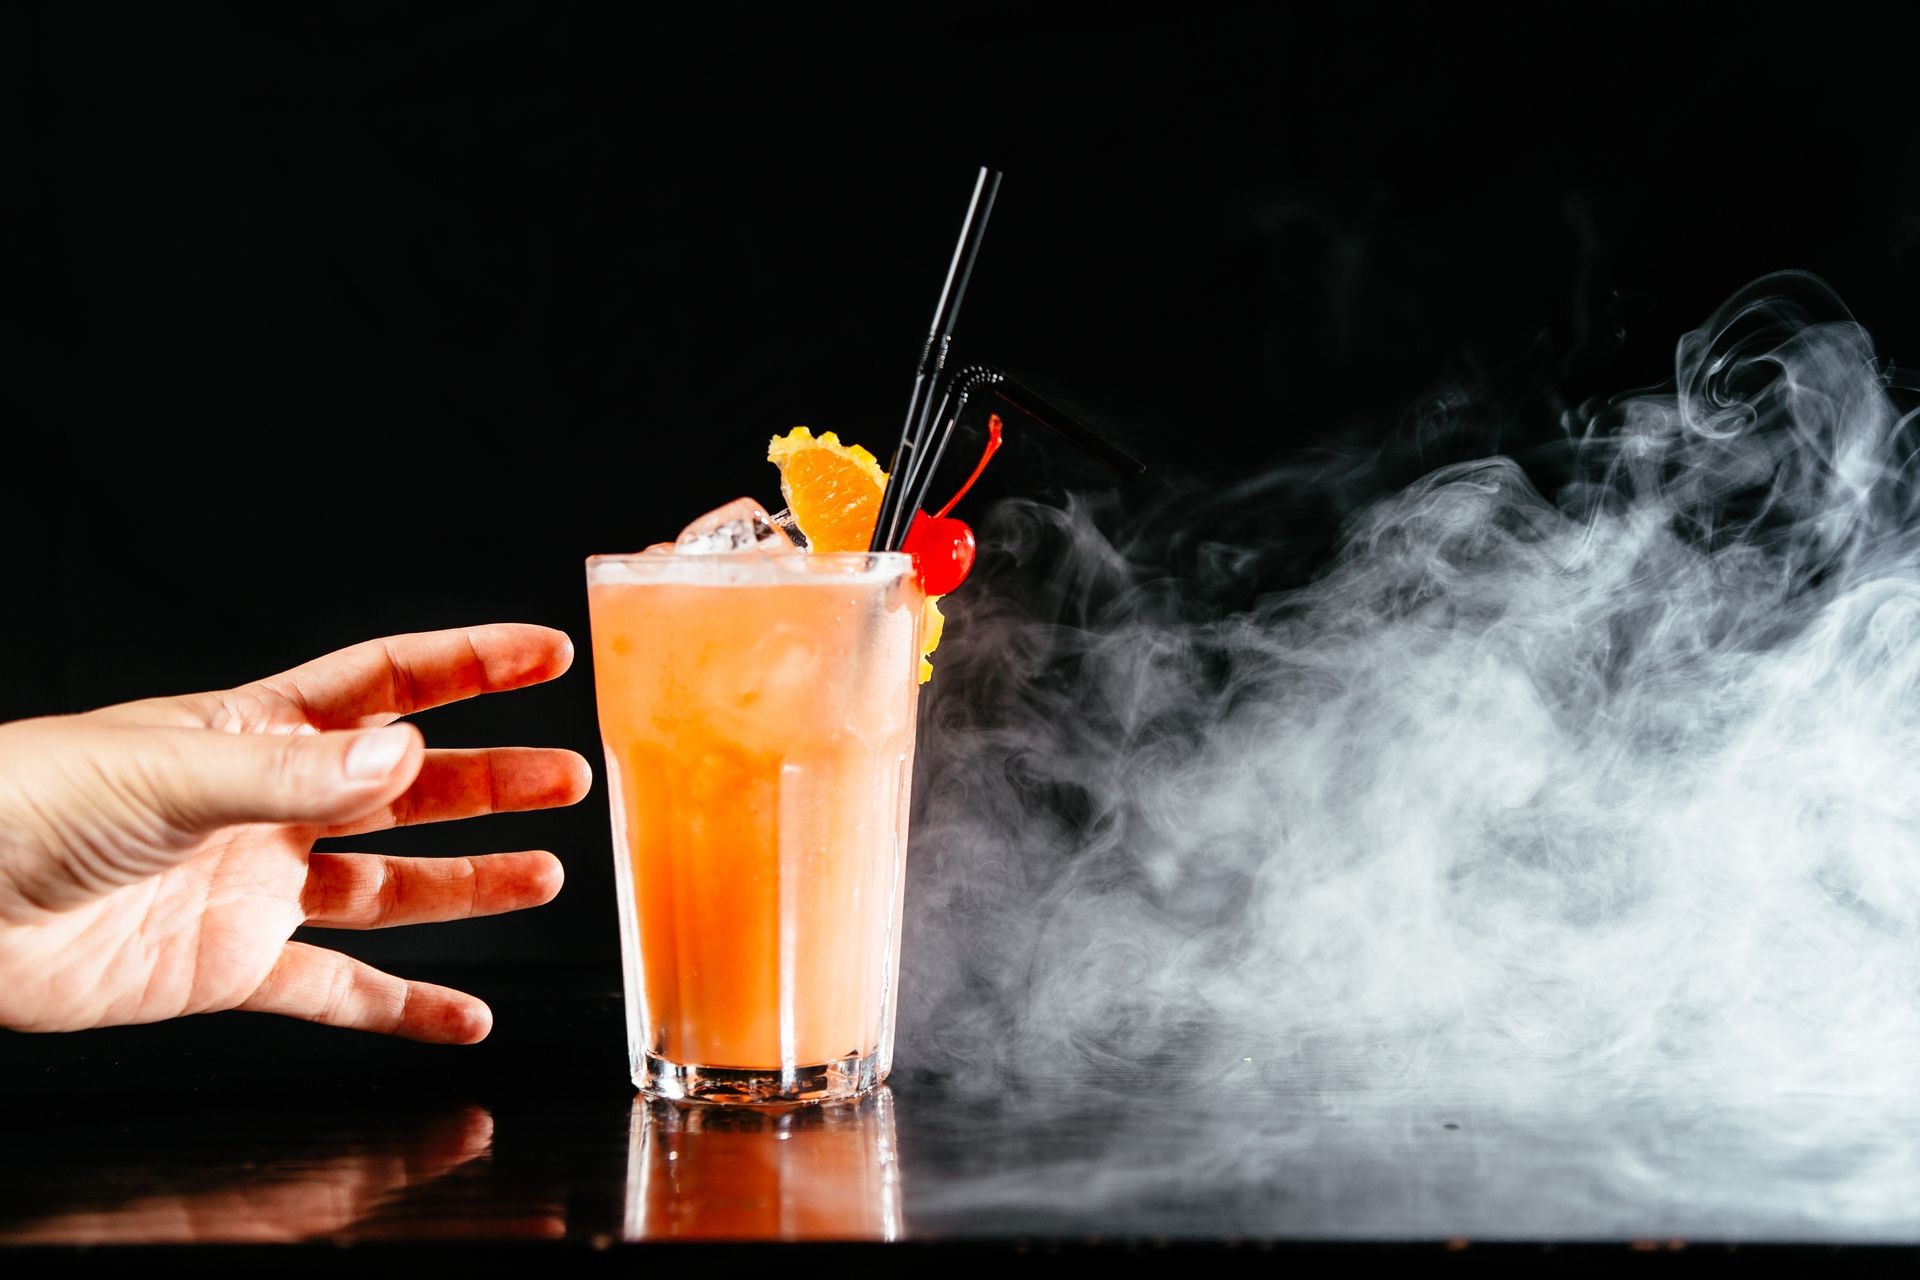 Colorful cocktail on black background. Man taking cocktail drink. Hand grabbing alcoholic drinks.